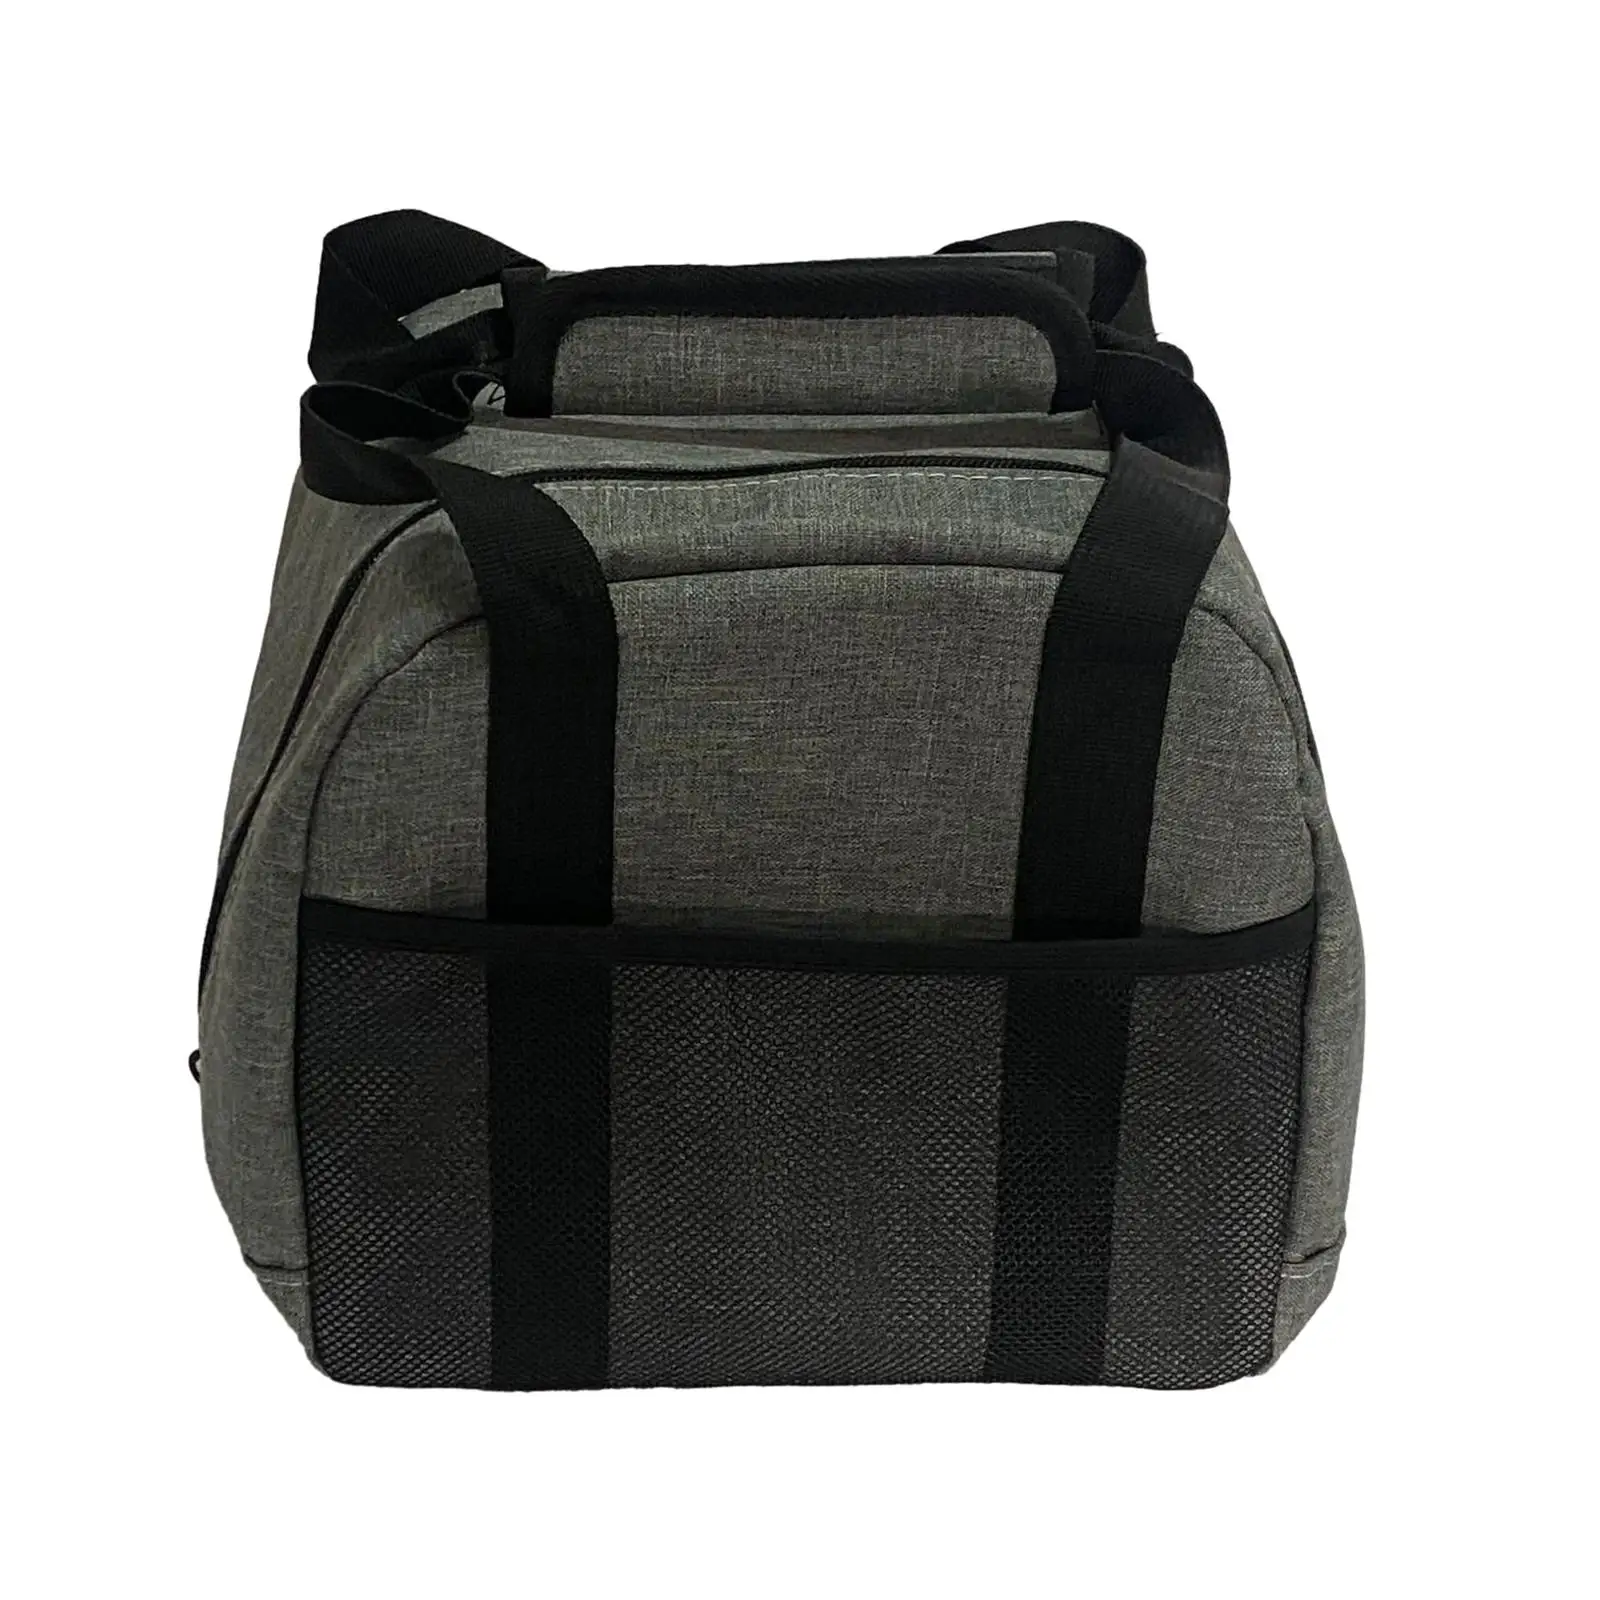 Single Bowling Ball Bag Bowling Tote Easy to Carry Compact Durable Carrying Bag